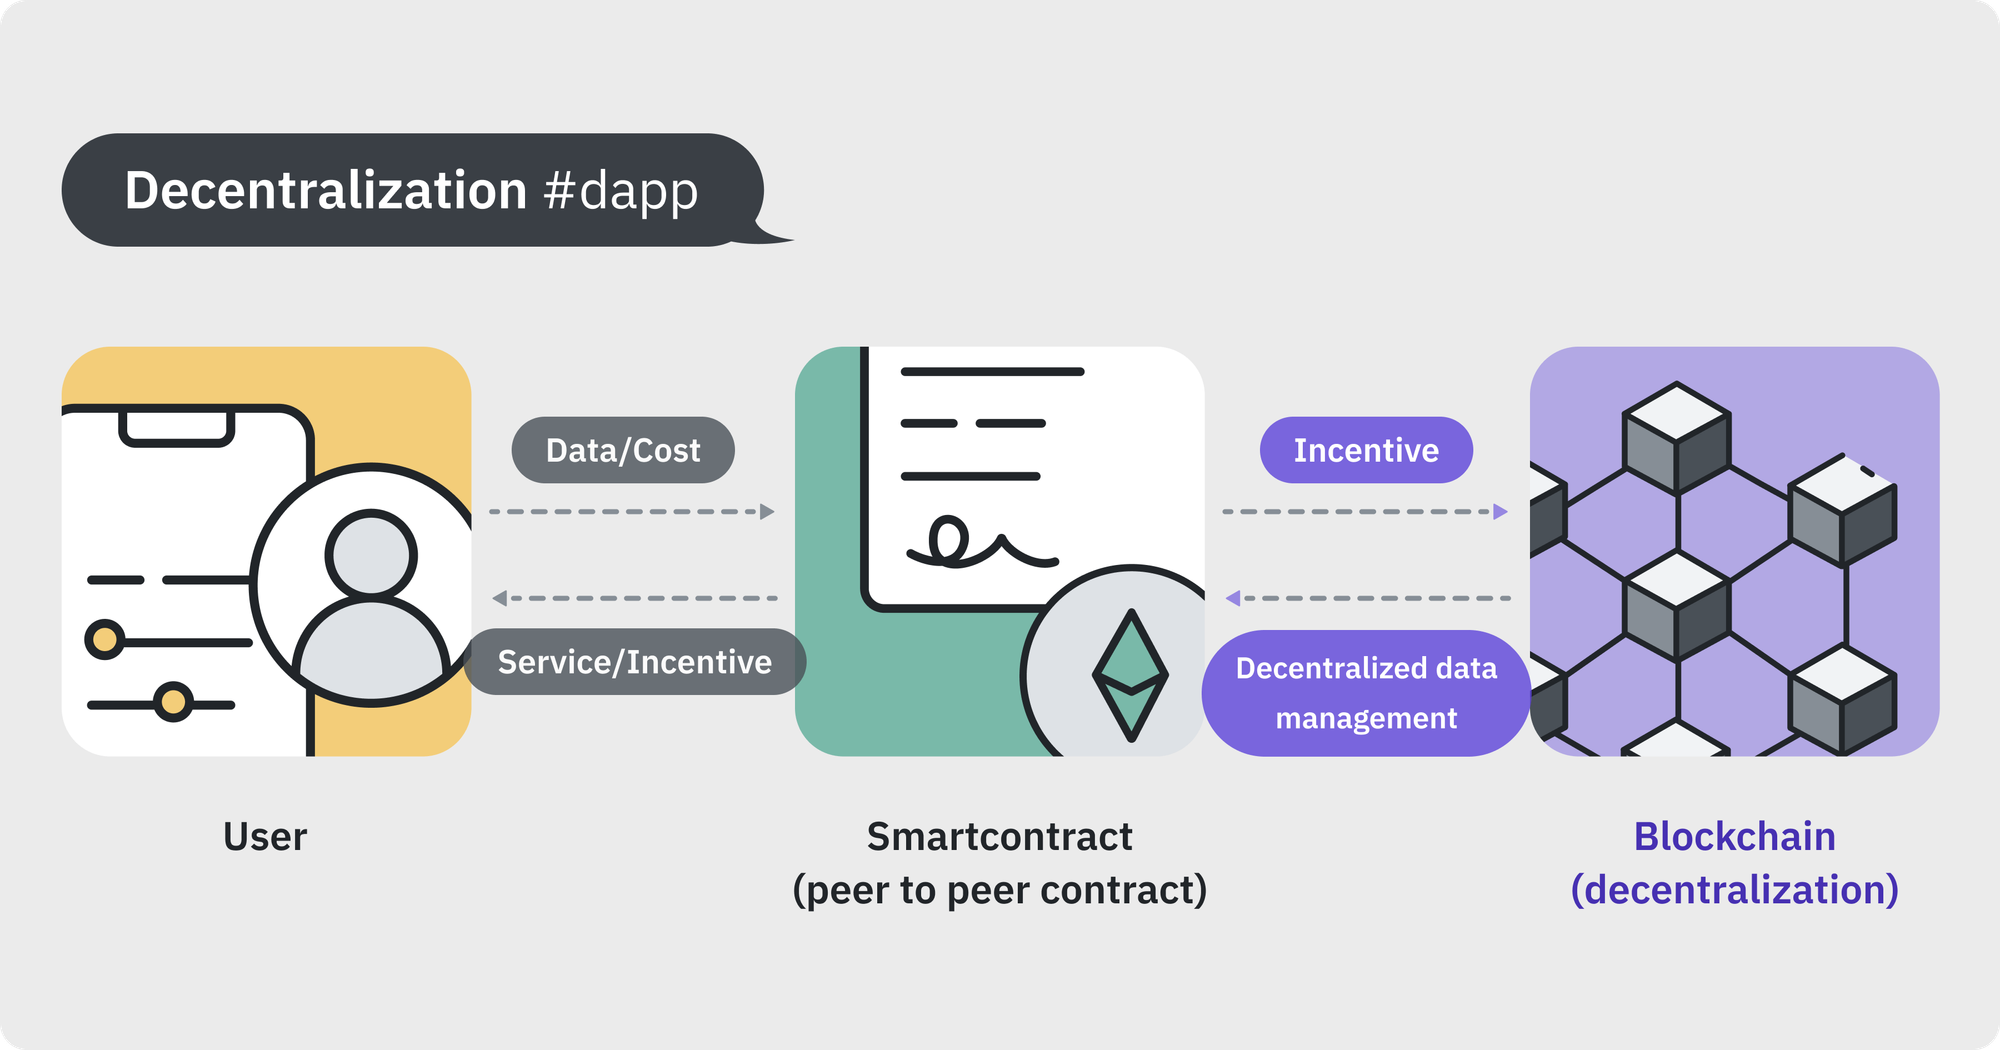 Instead of exchanging data on a centralized platform, a distributed network maintains data in a decentralized structure.